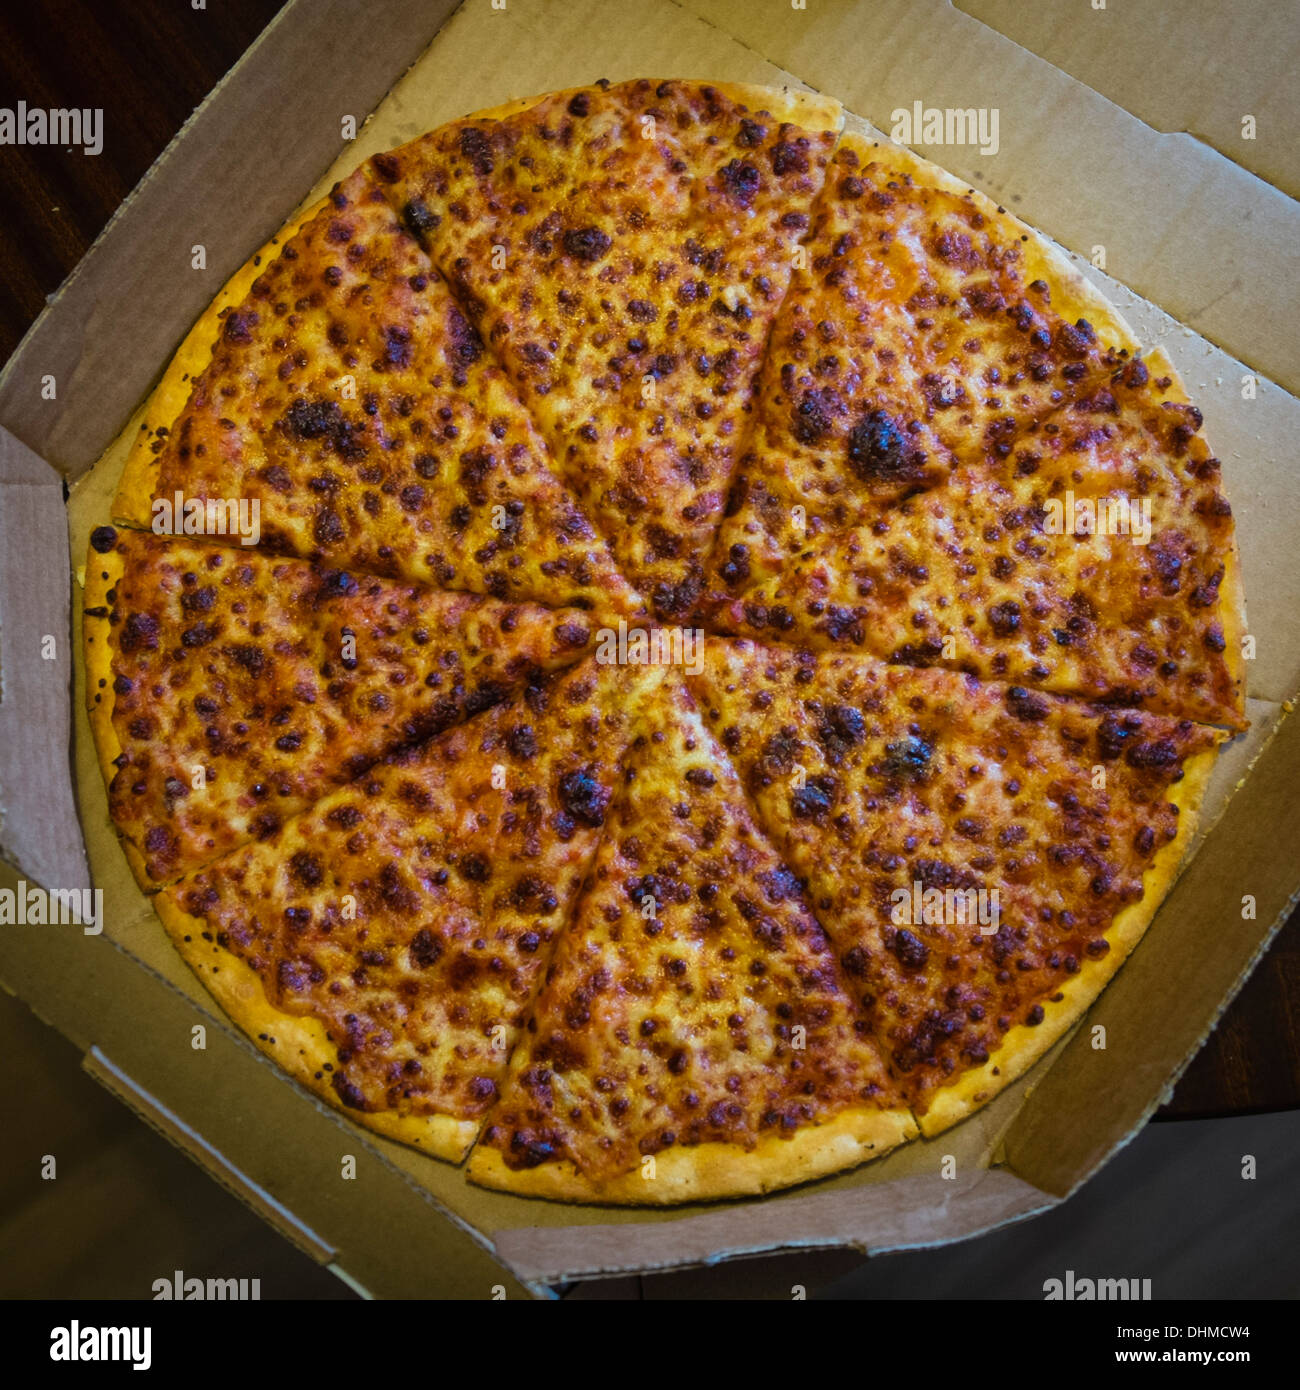 Dominos Uk High Resolution Stock Photography And Images Alamy